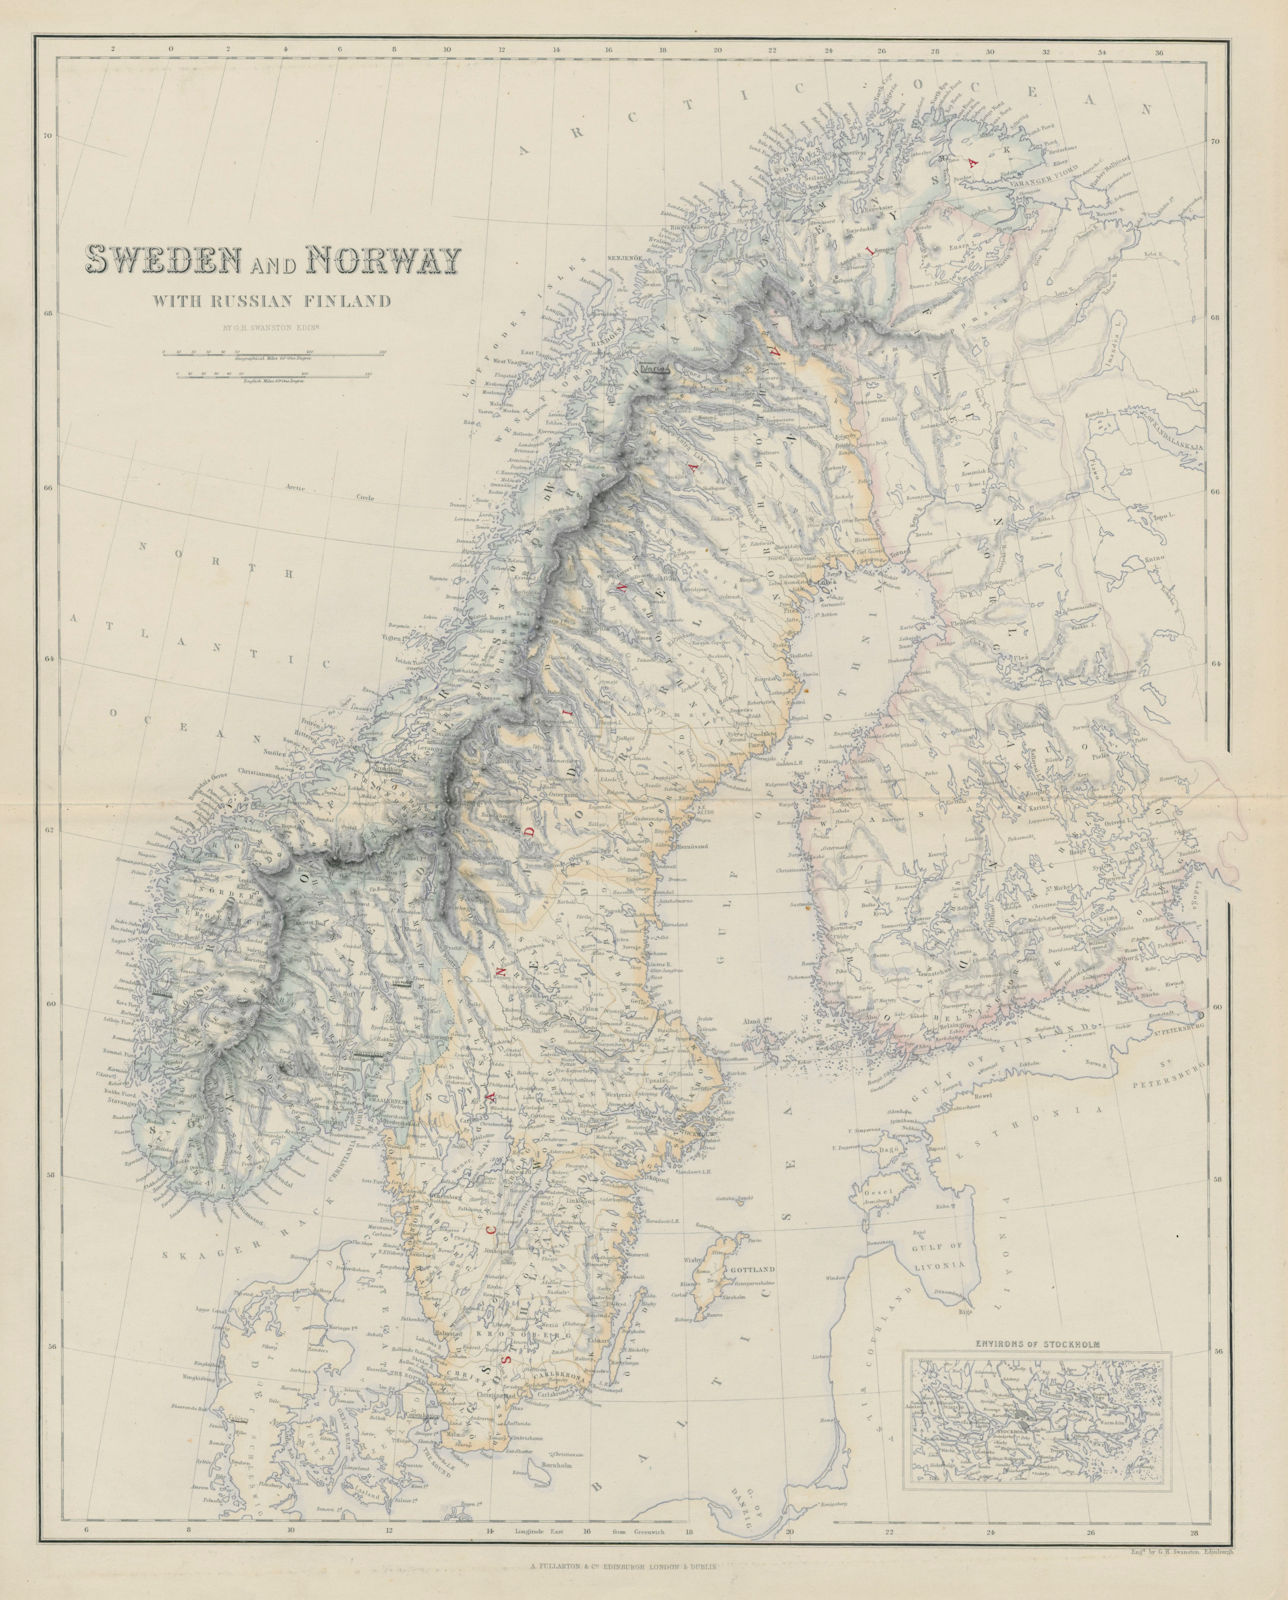 Sweden and Norway with Russian Finland. Scandinavia. SWANSTON 1860 old map